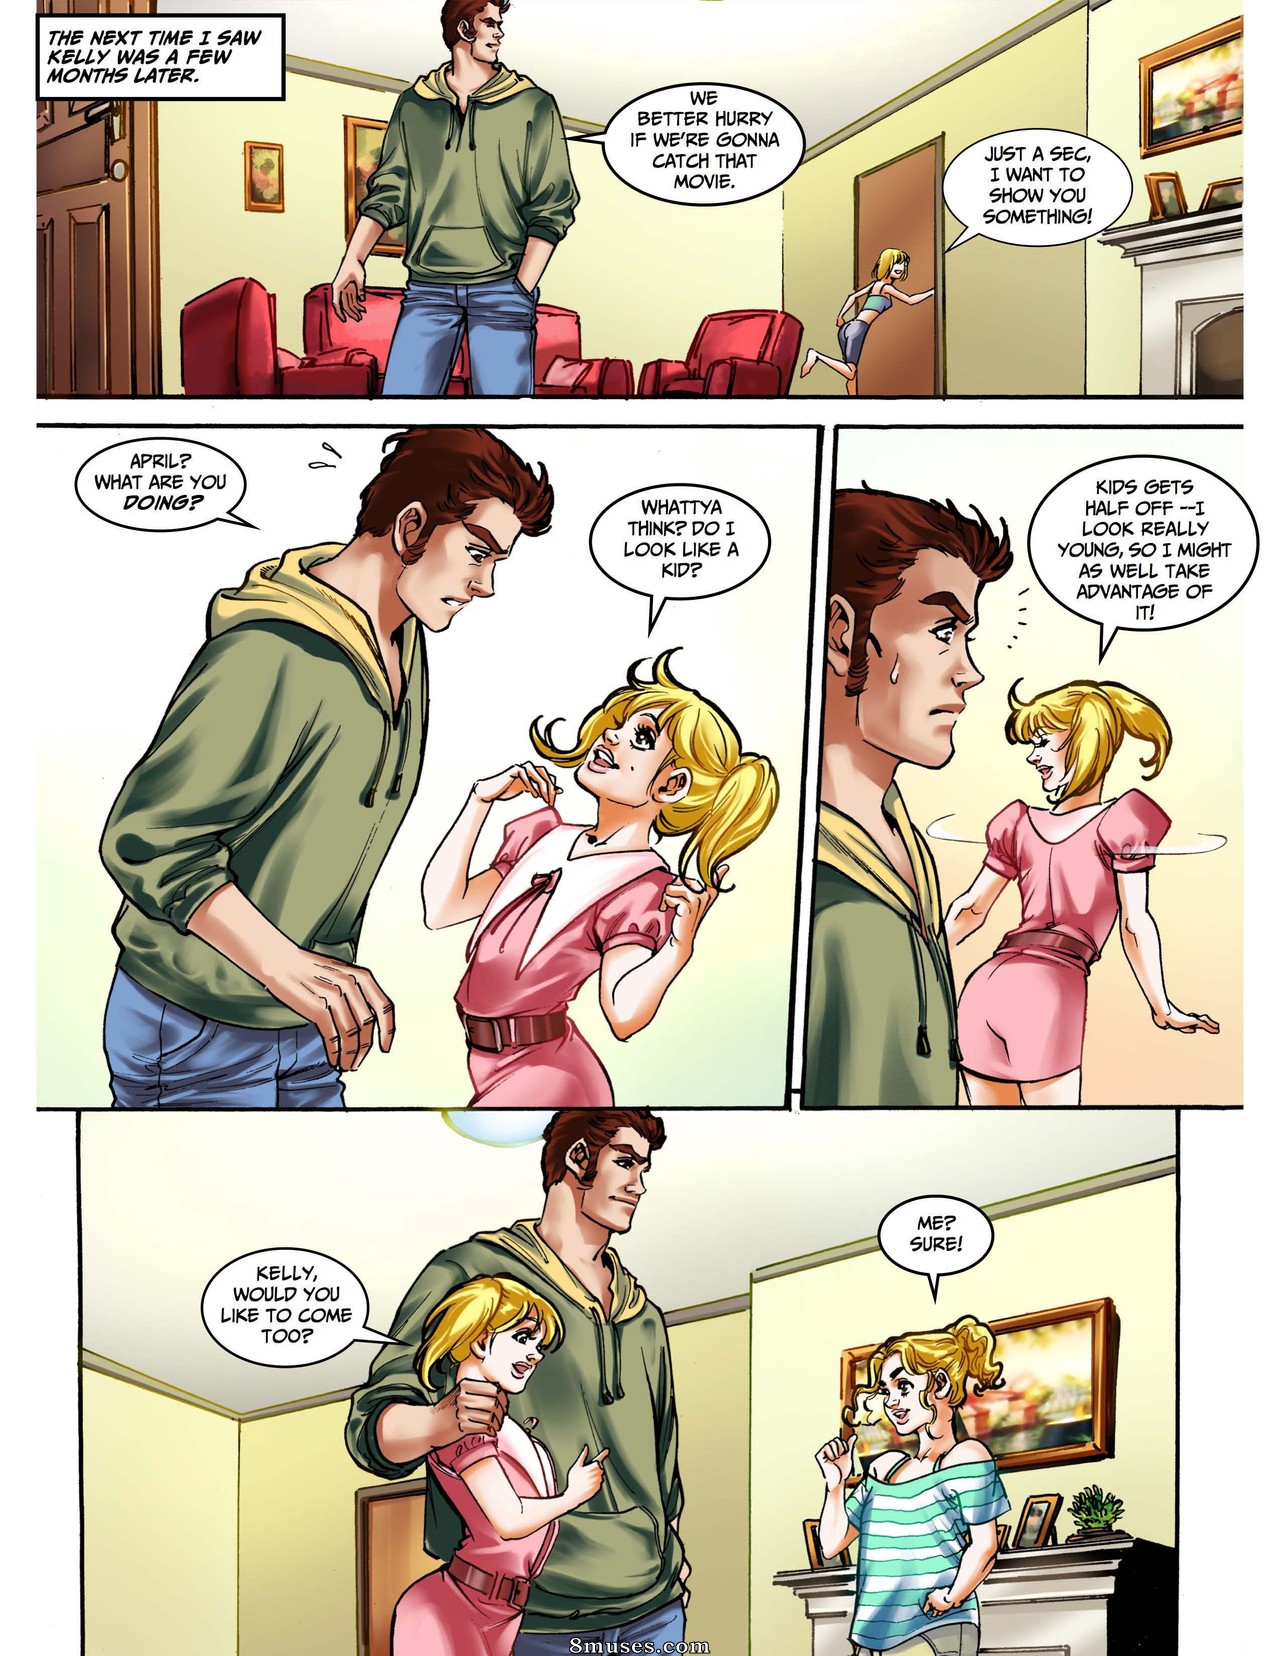 Cartoon Sister Brother Porn - The Big Little Sister Issue 1 - 8muses Comics - Sex Comics and Porn Cartoons